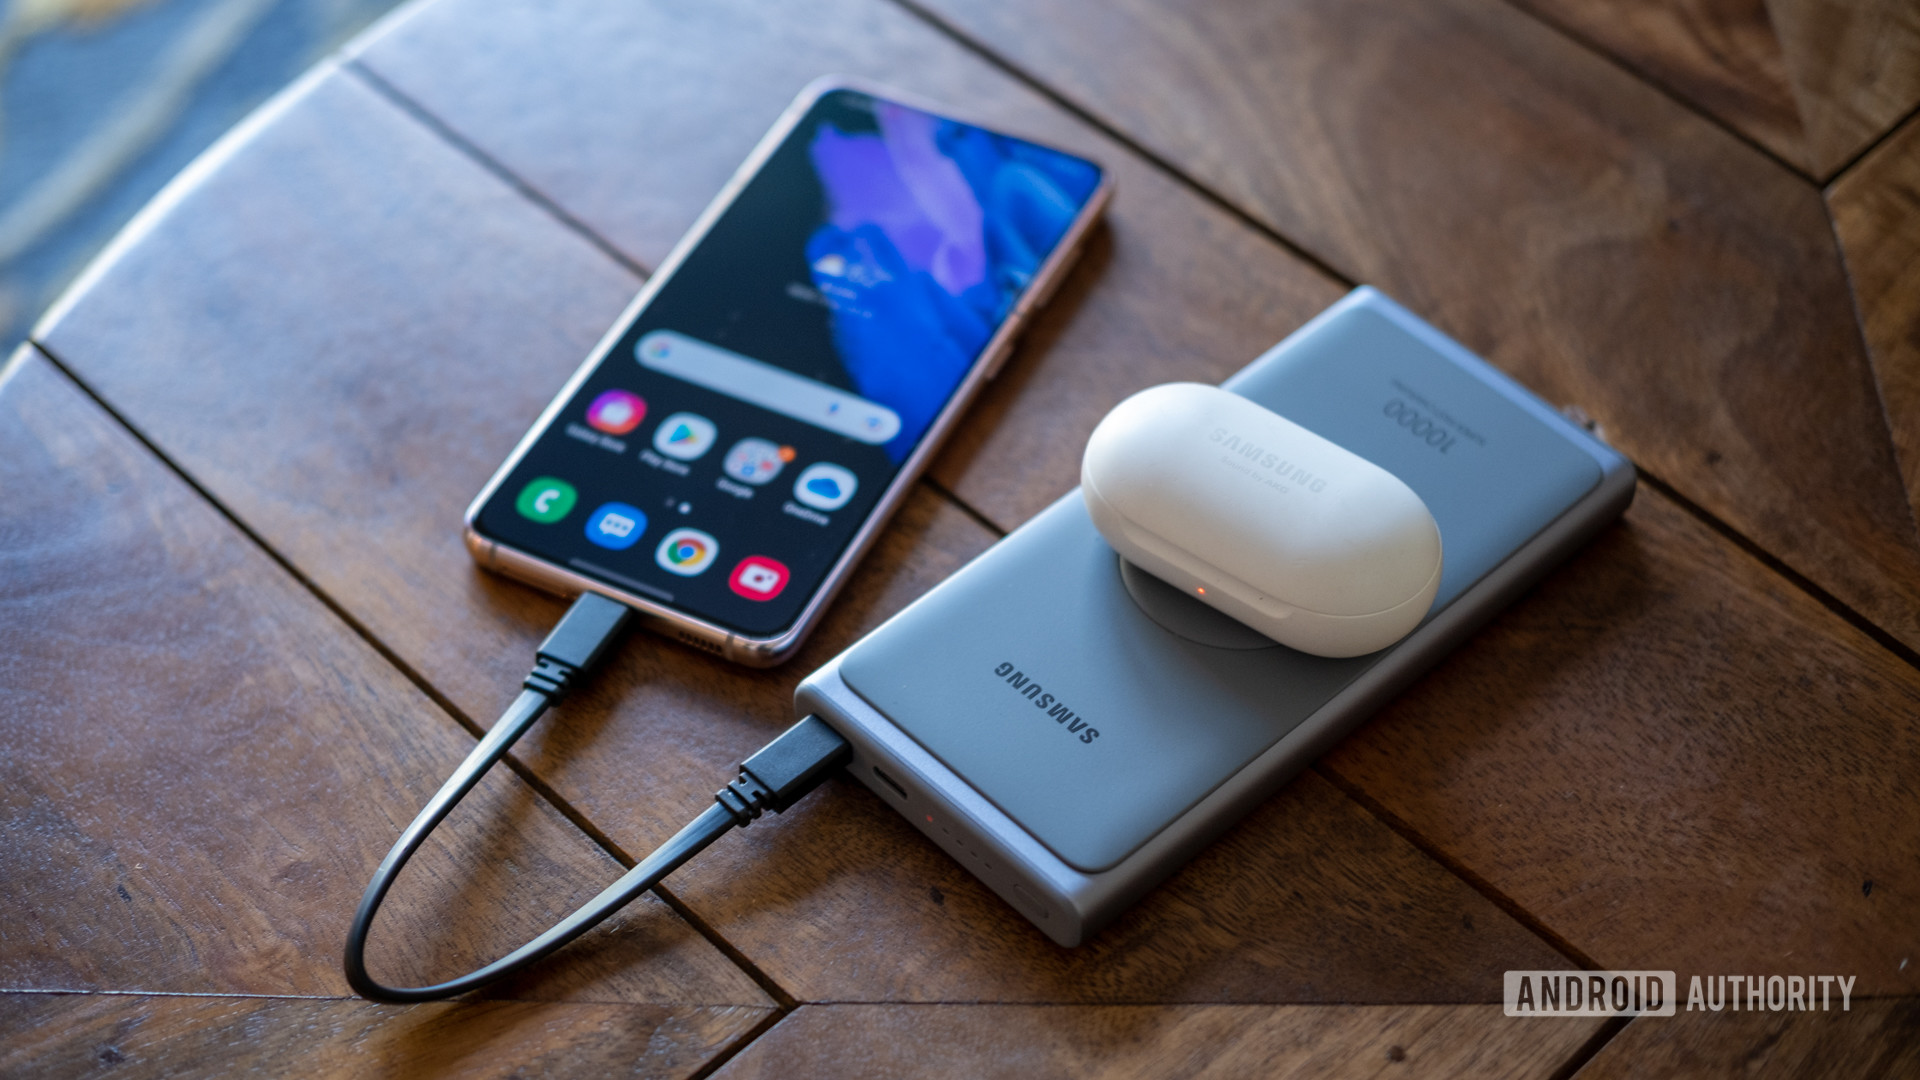 Samsung super fast power bank on table charging s21 and galaxy buds above